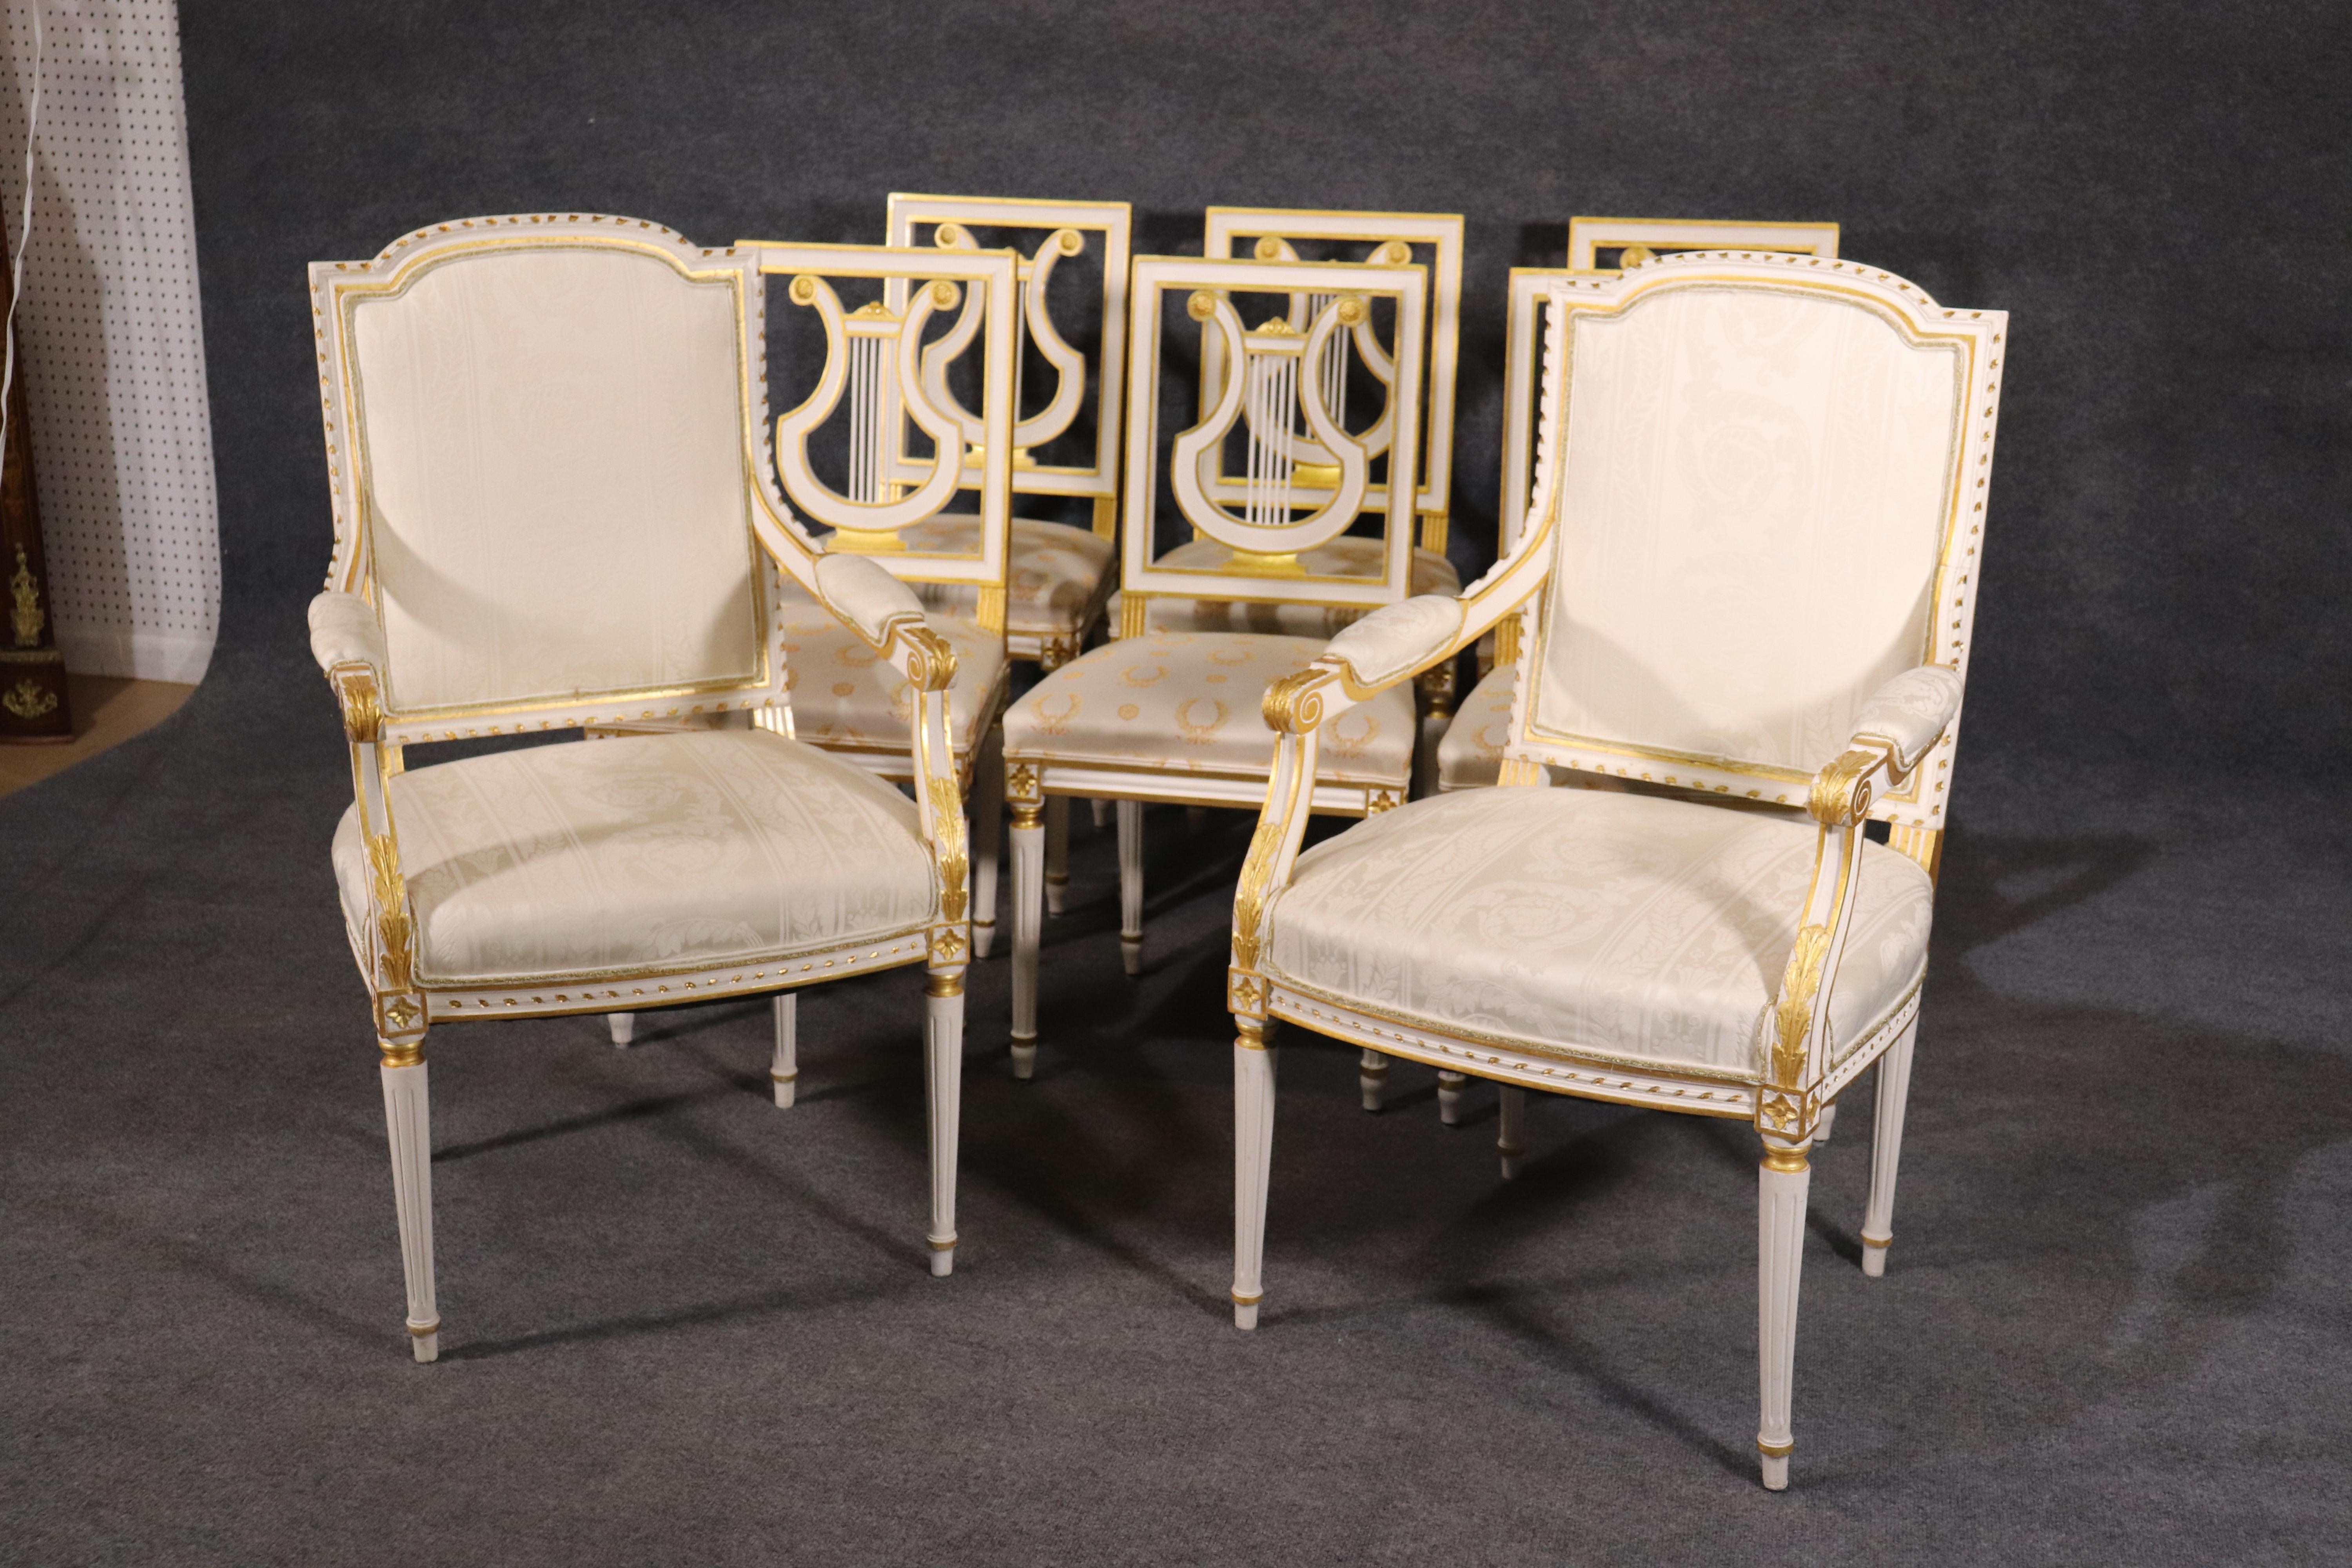 These gorgeous chairs are stamped Jansen and made in France. They feature bright white painted frames and genuine gold leaf gilded details. The upholstery is good but as they are used they are not perfect and expect some stains and minor spots here